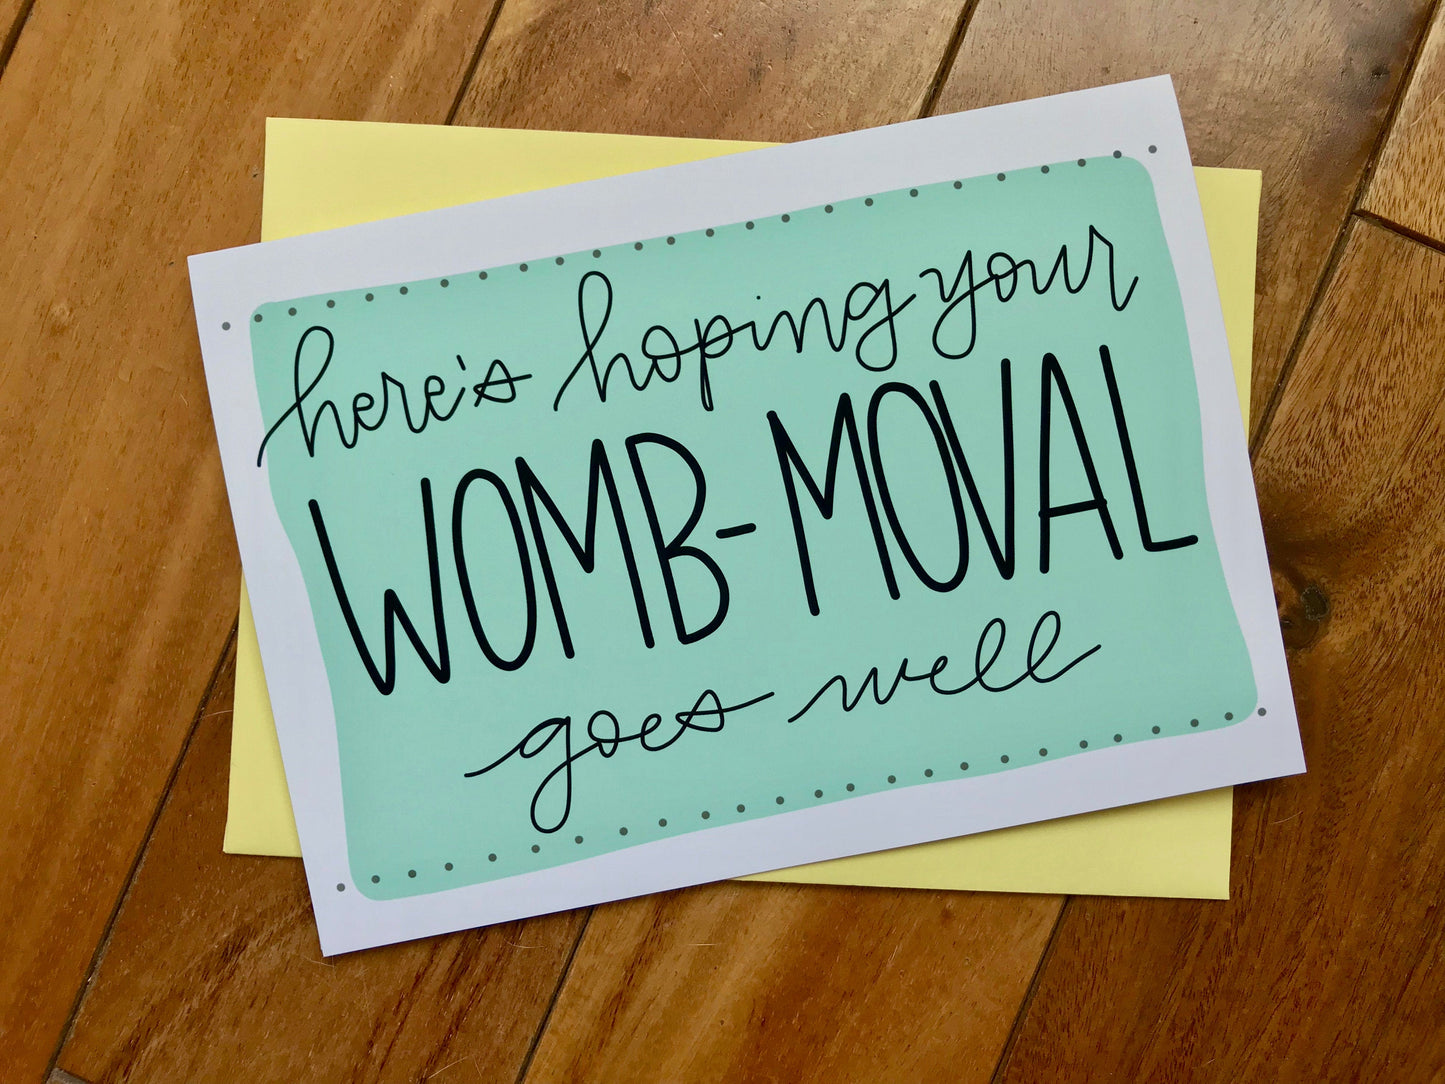 Here's Hoping Your Womb-Moval Goes Well by StoneDonut Design